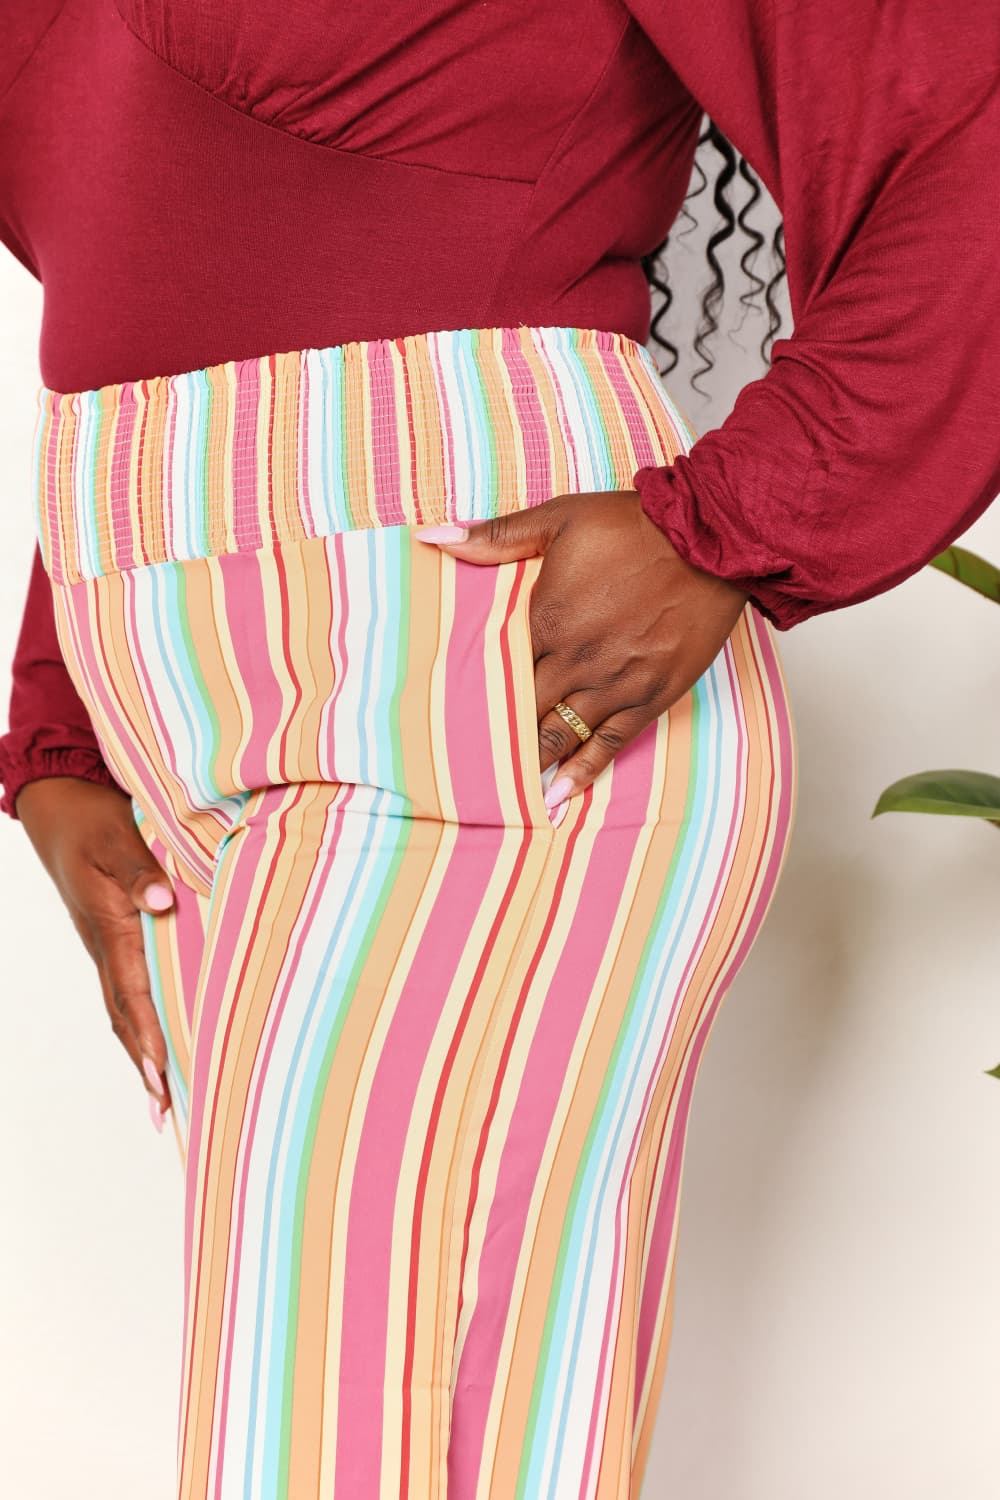 Festivus For Us Pants with Pockets